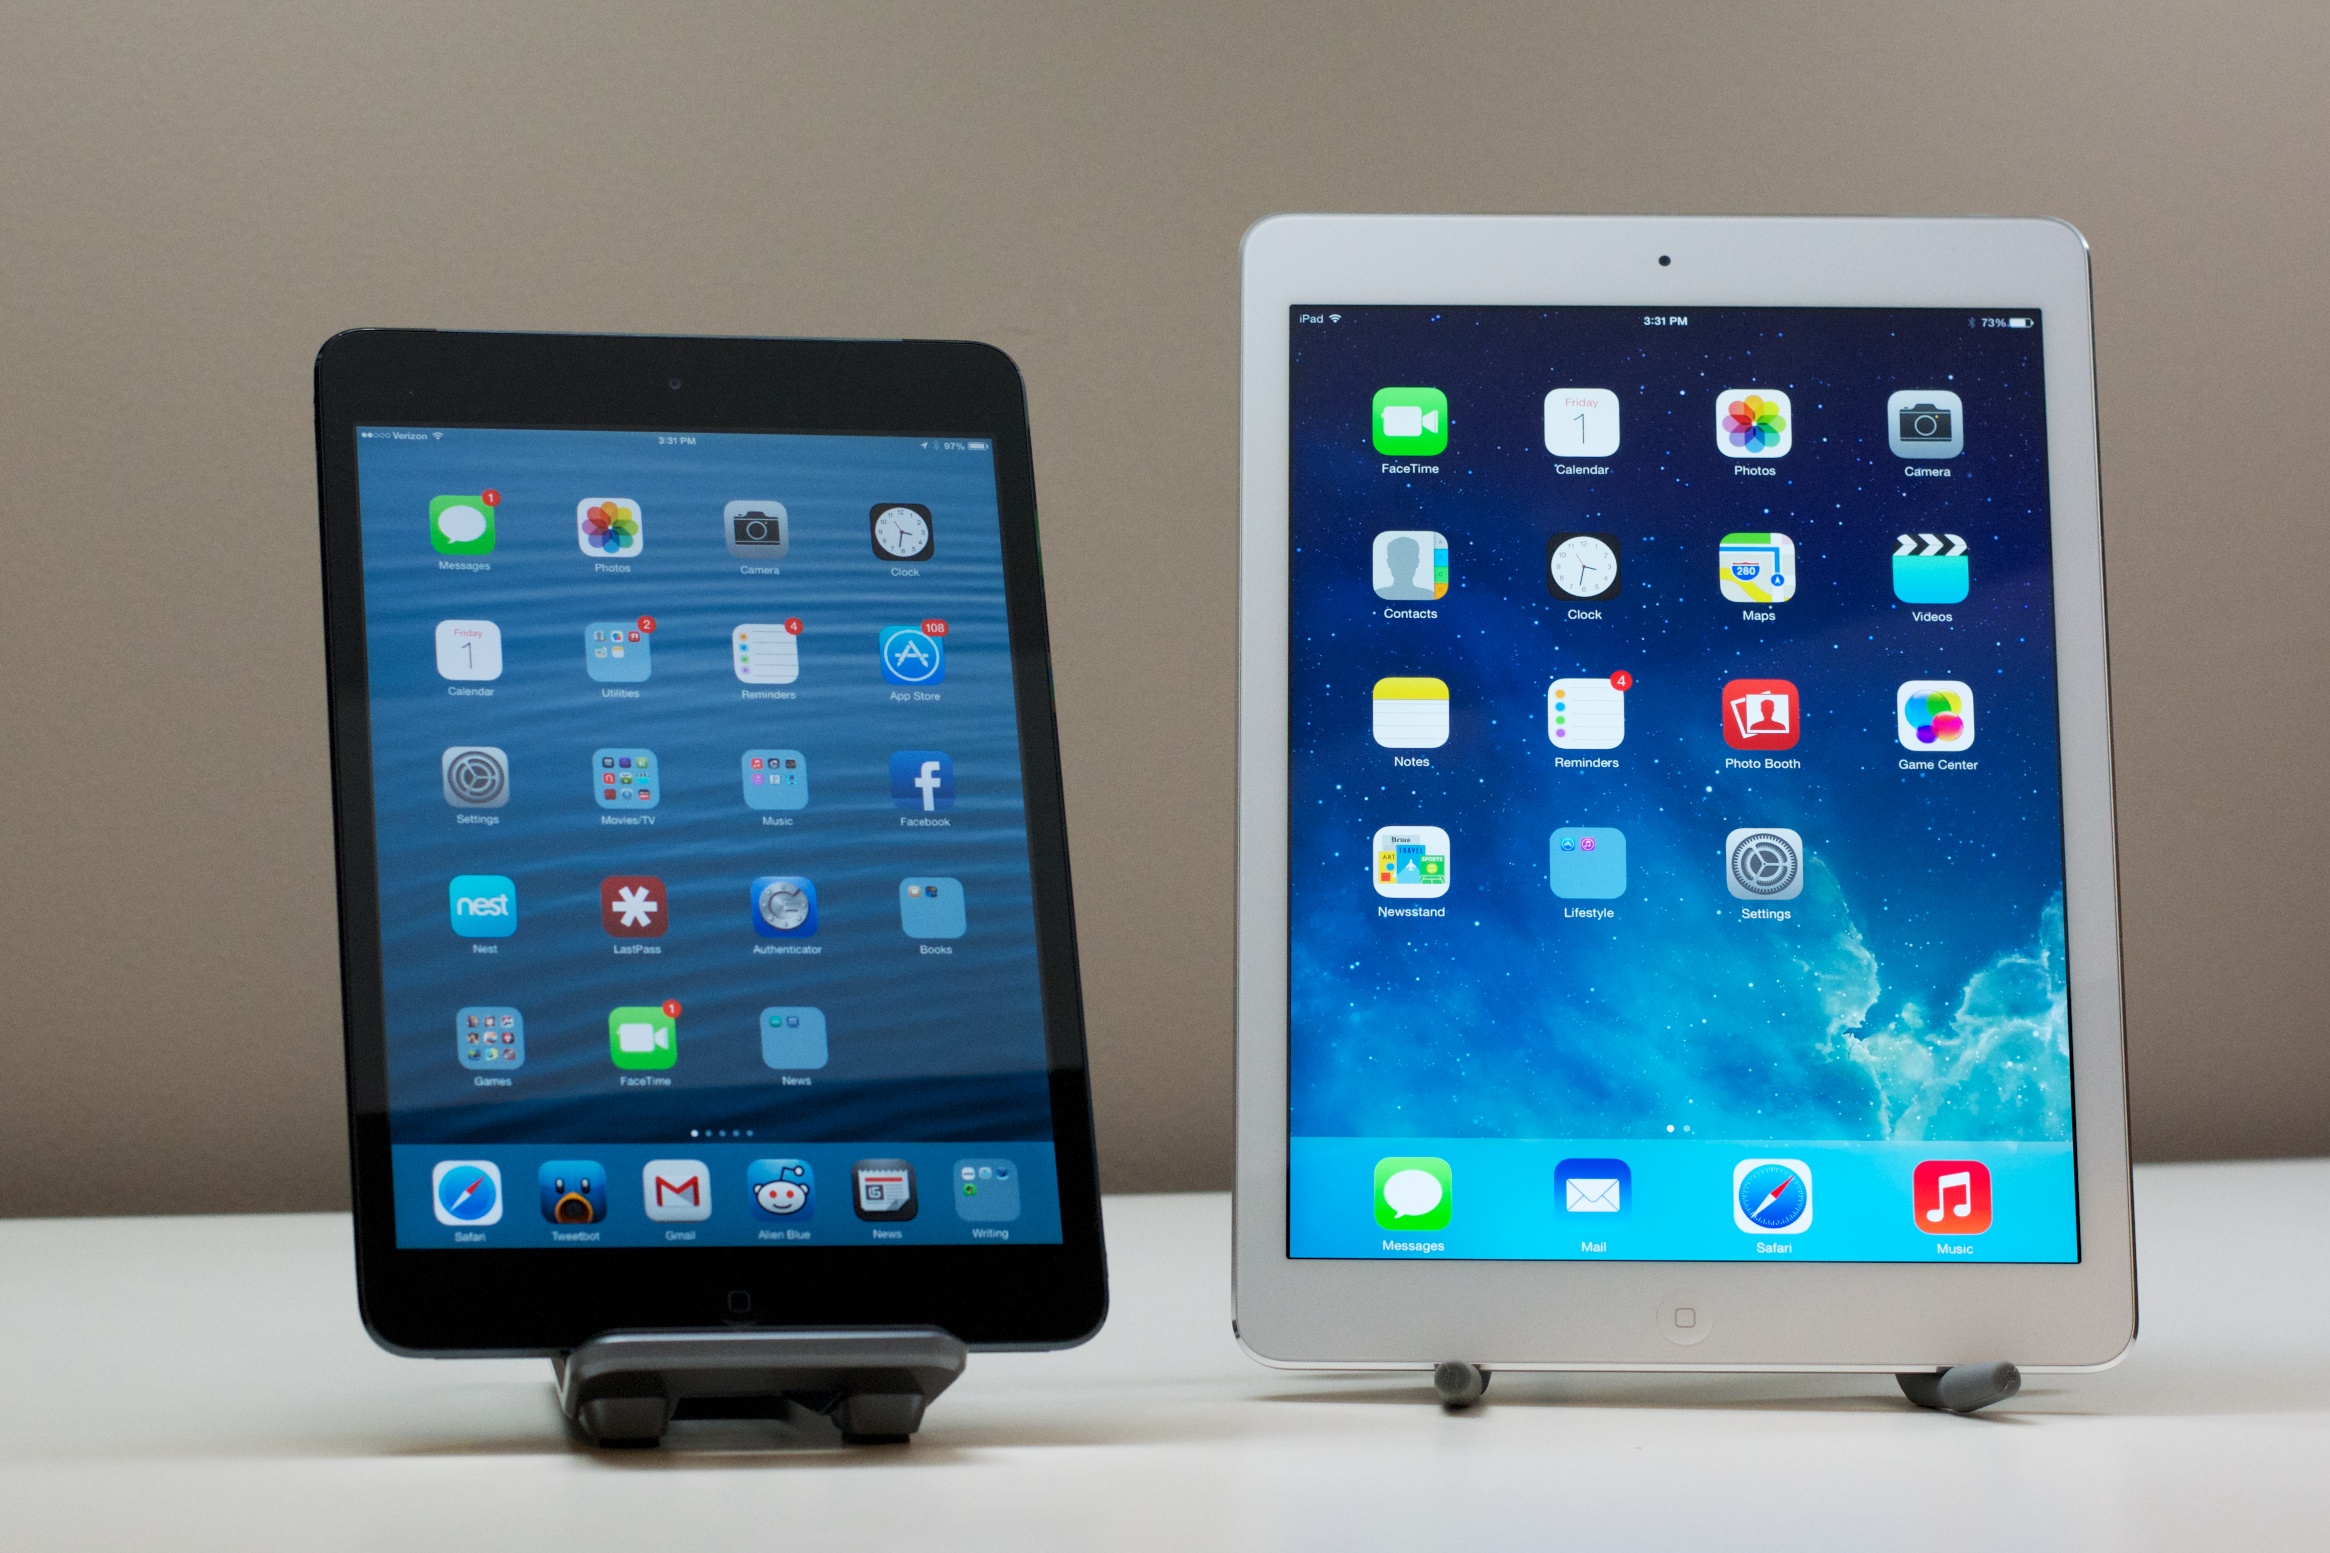 The iPad Black Friday deals are incredible so far, and we don't know Walmart's offers.